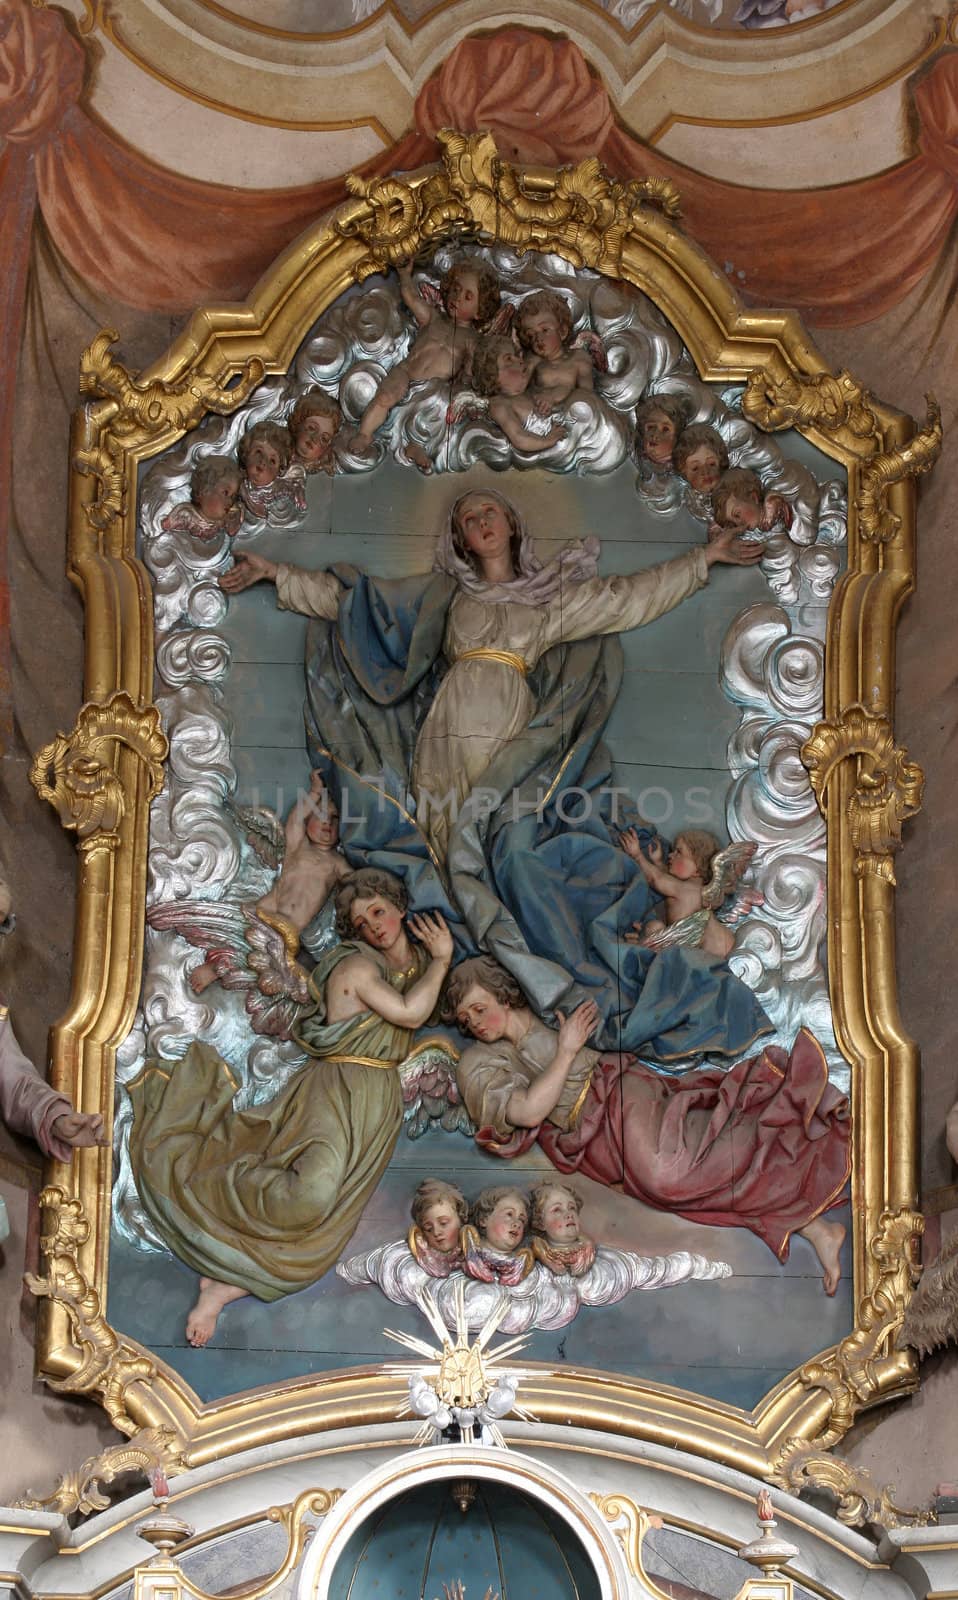 Assumption of the Virgin Mary